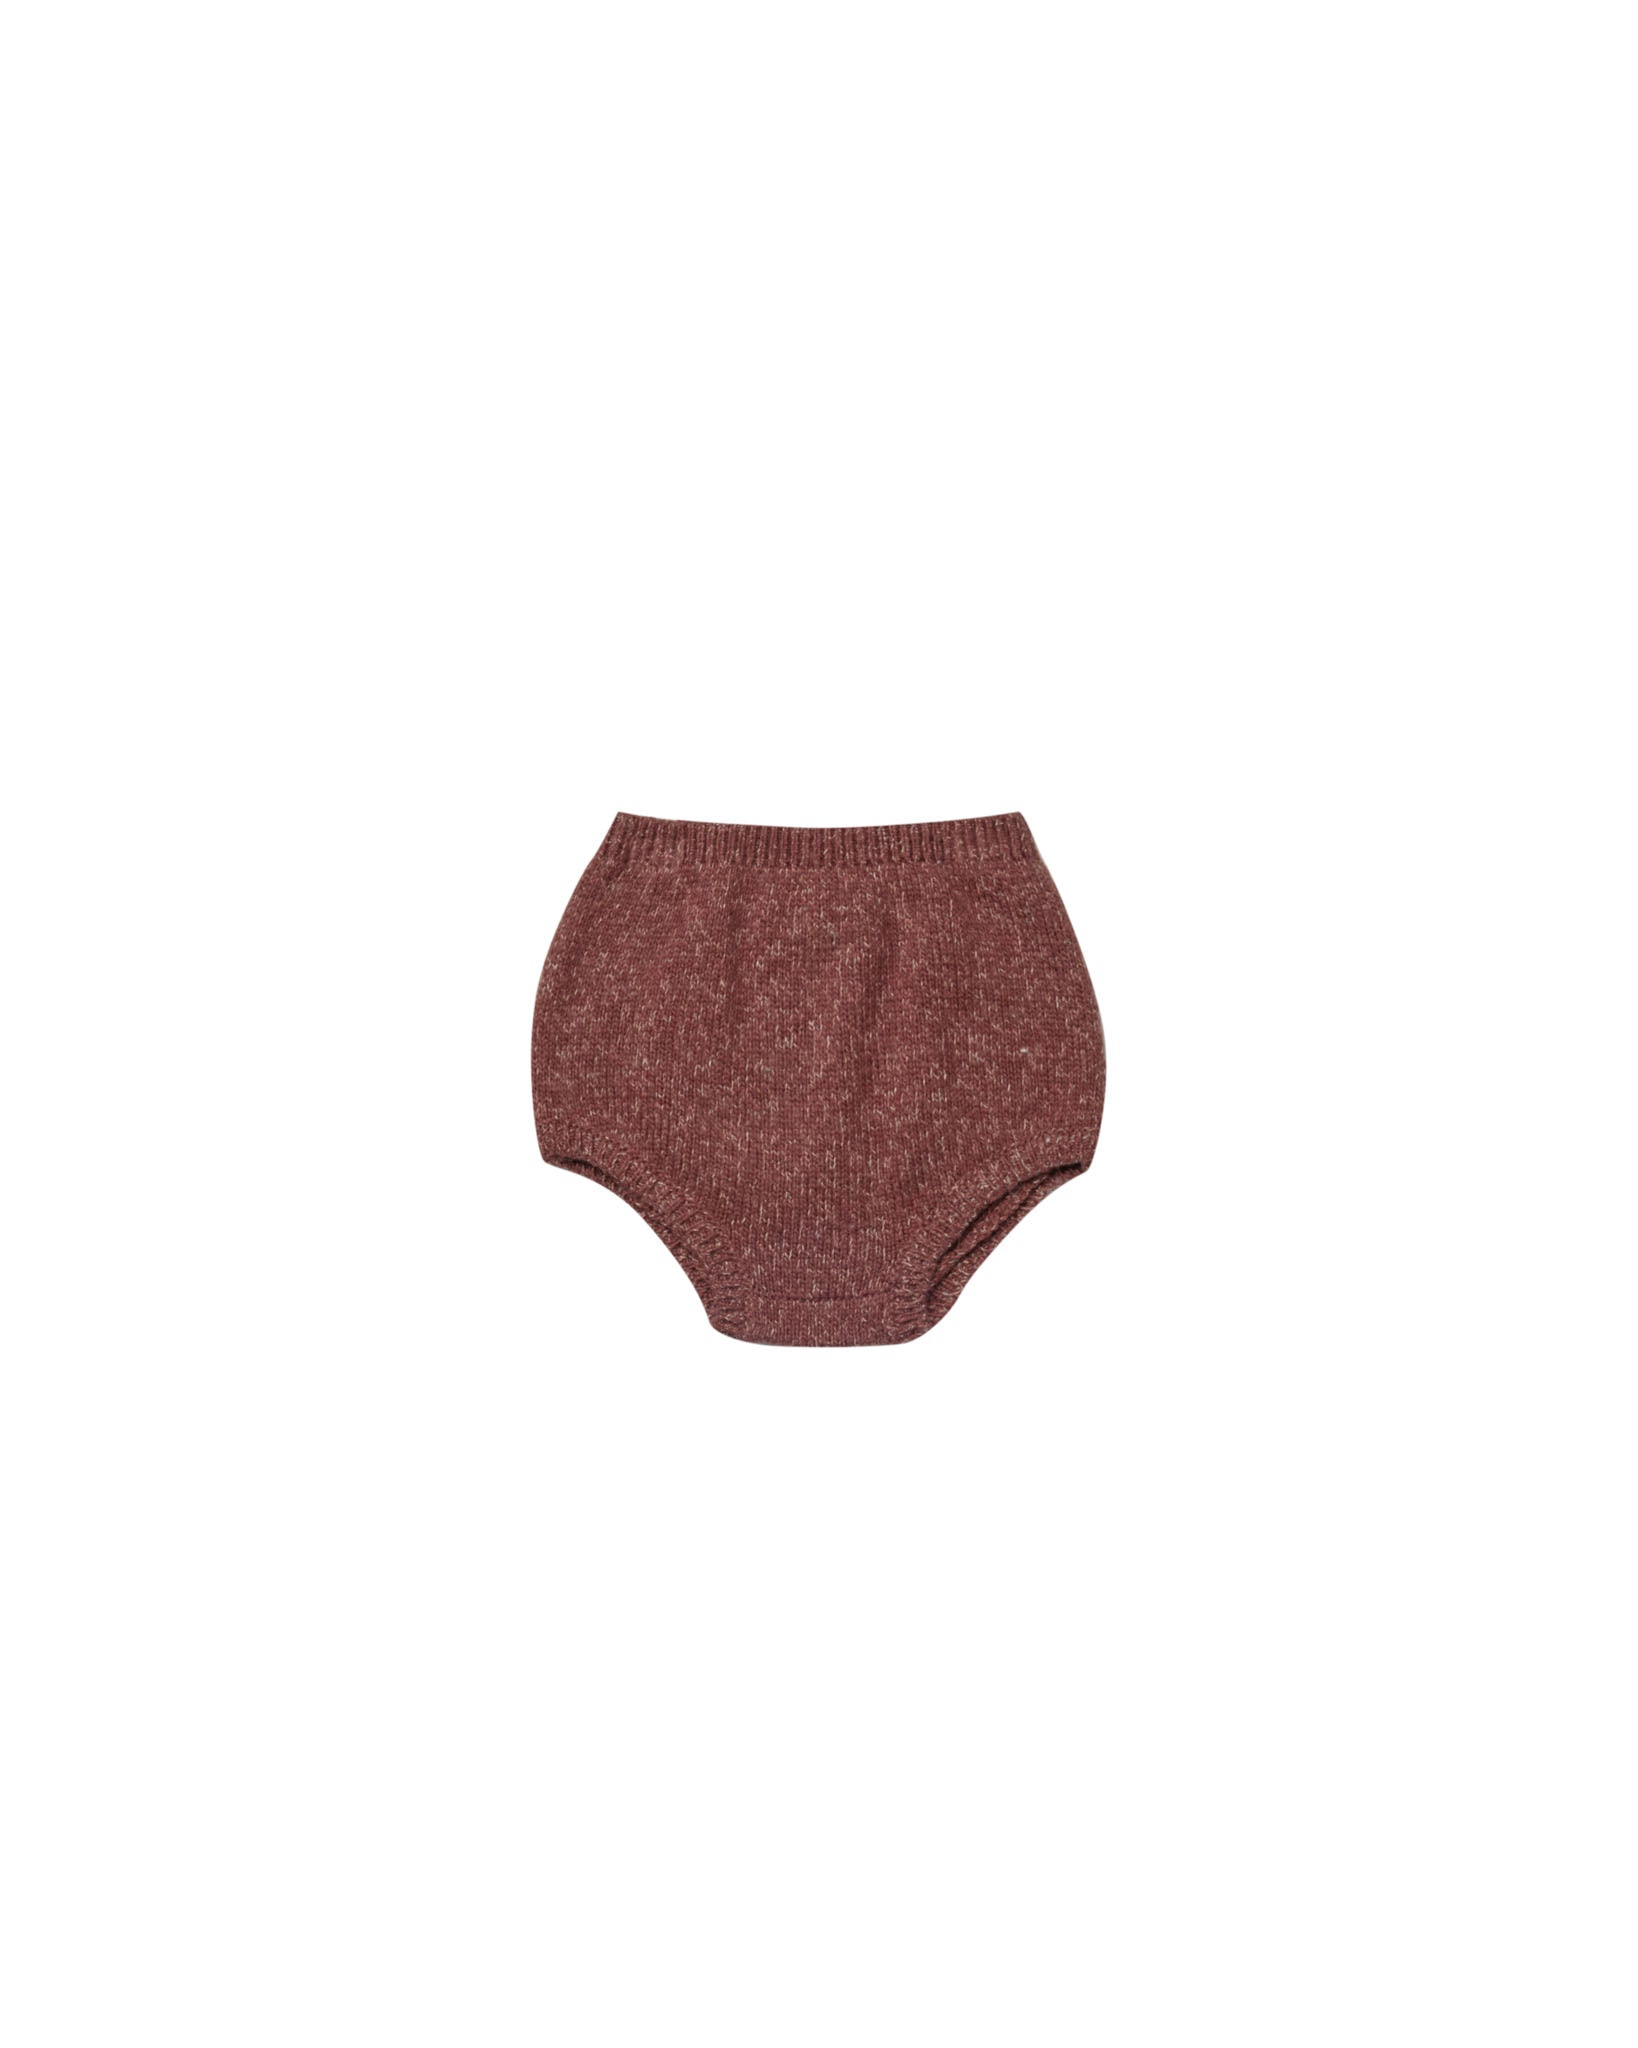 Quincy Mae | Knit Bloomer || Heathered Plum